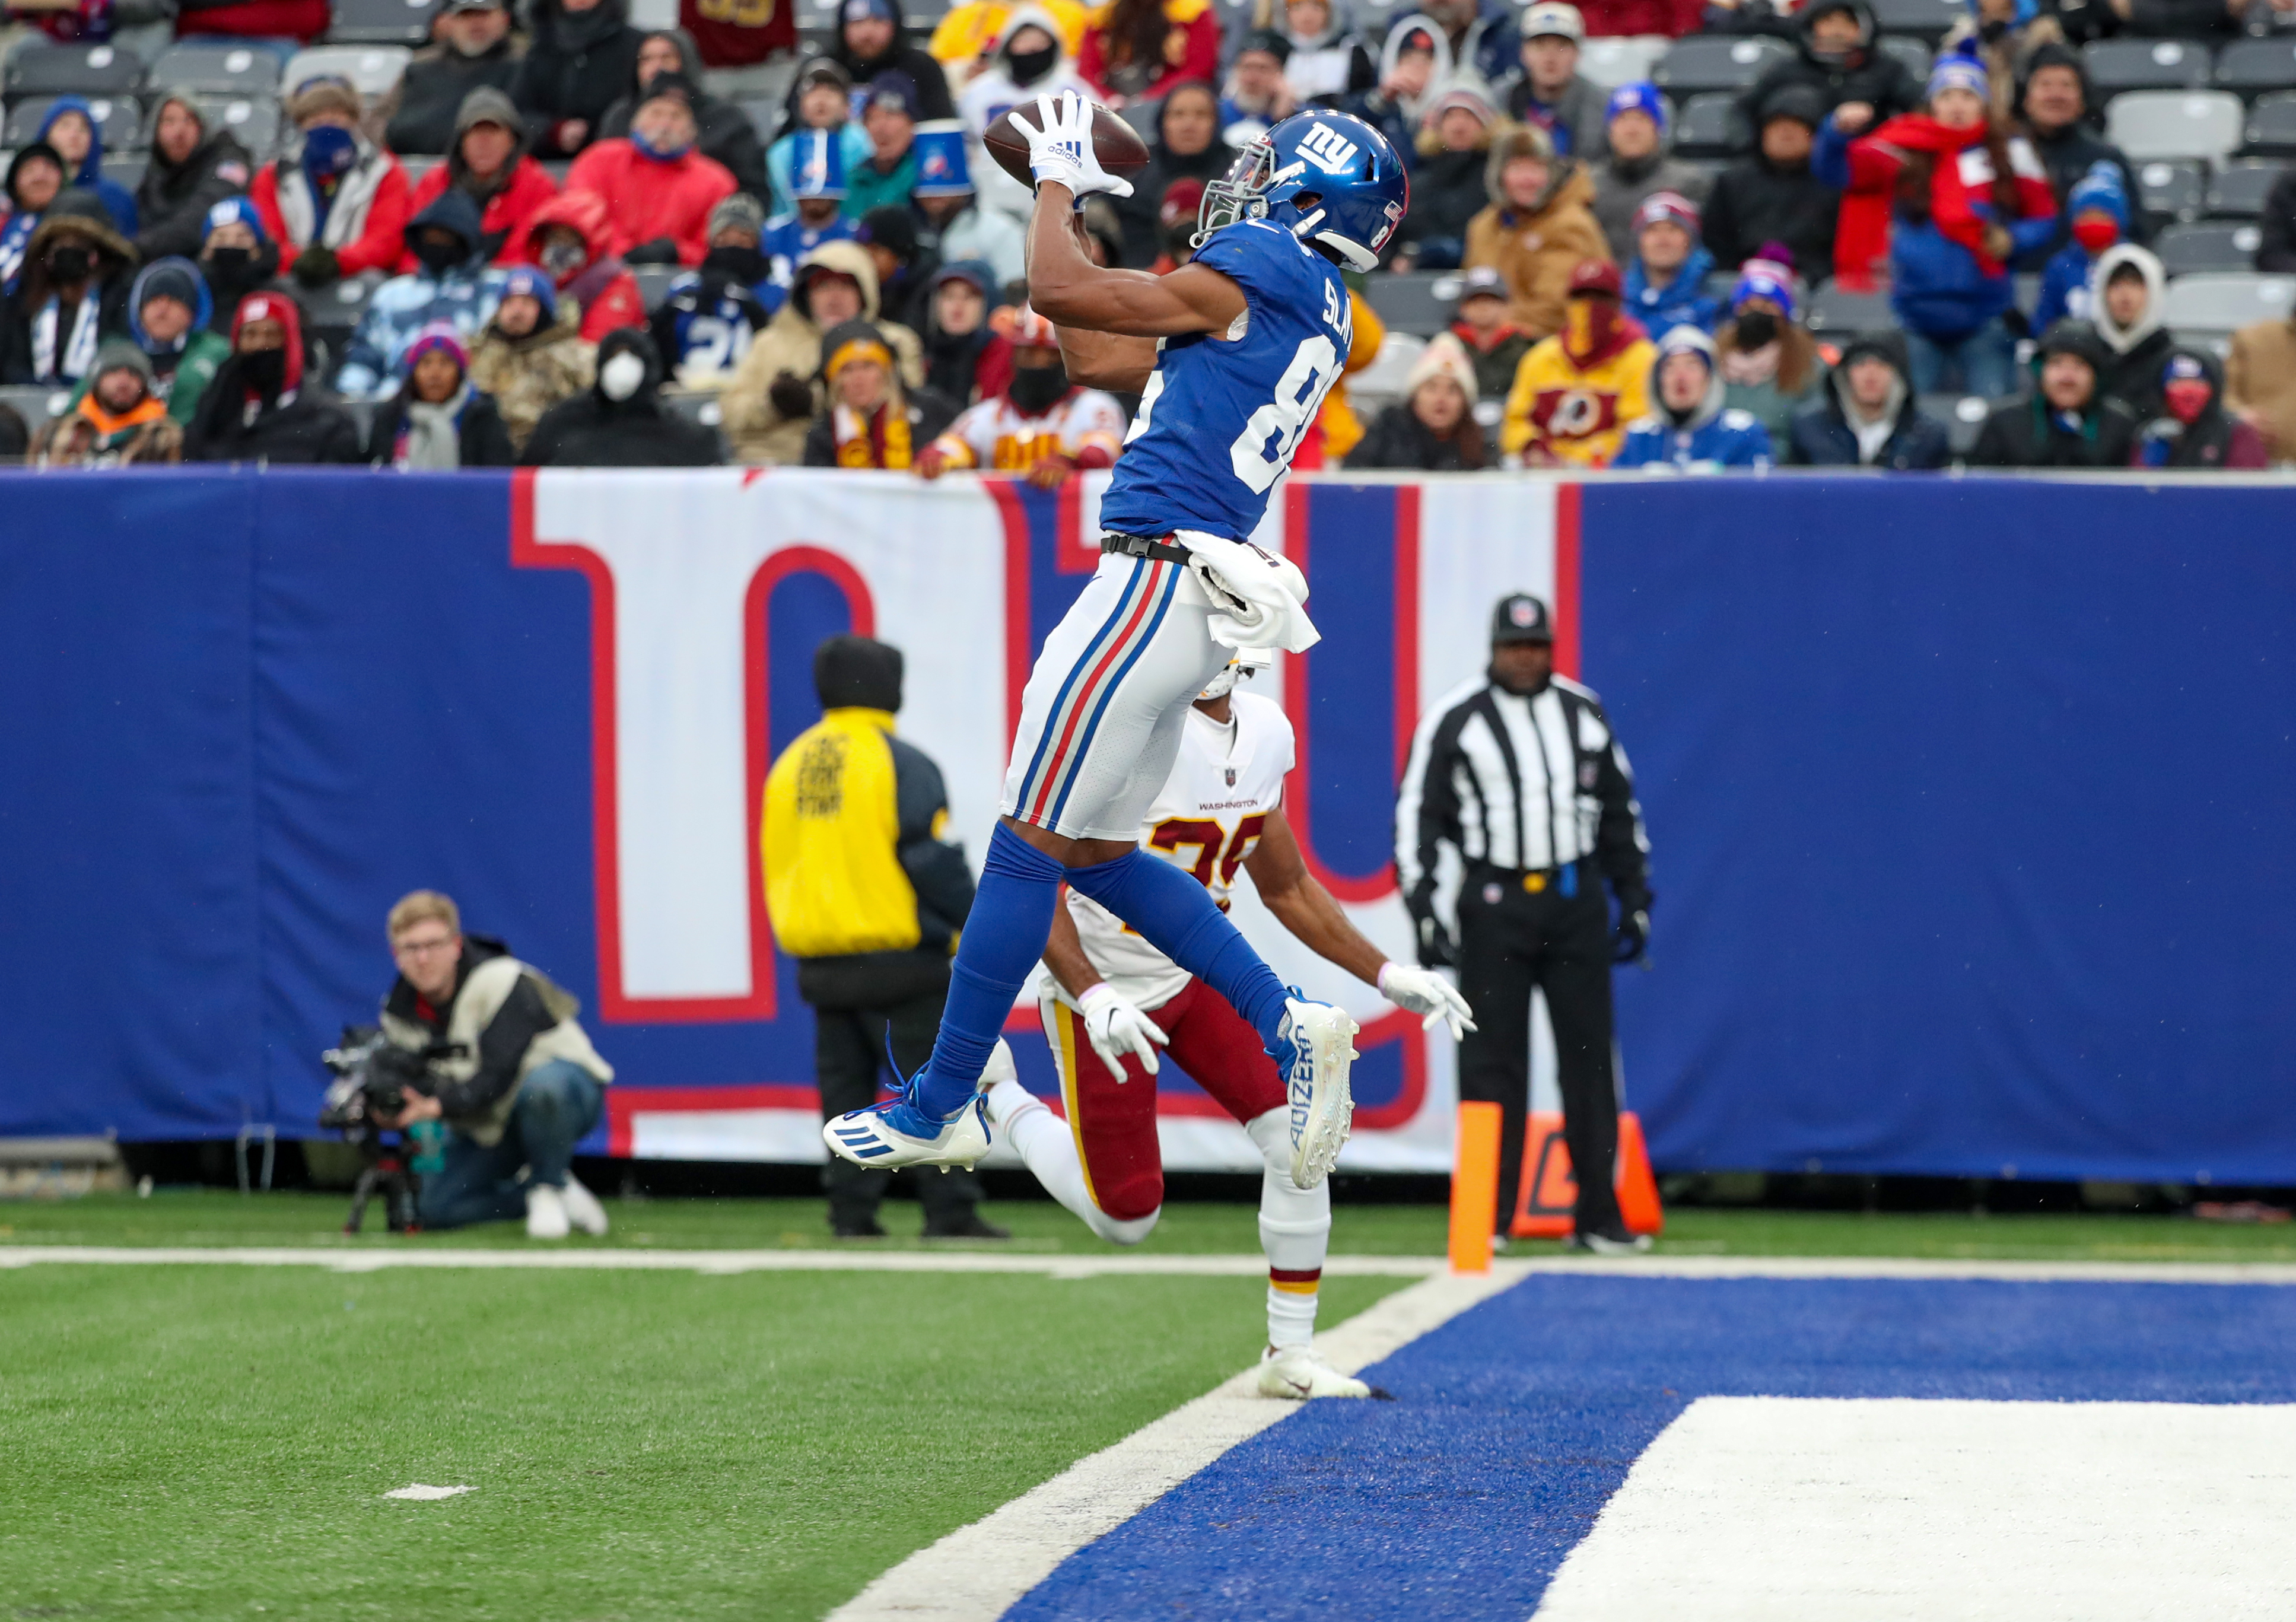 New York Giants wide receiver Darius Slayton (86) catches a pass for a 22-yard touchdown against the Washington Football Team on Sunday, Jan. 9, 2022 in East Rutherford, N.J. Washington won, 22-7.